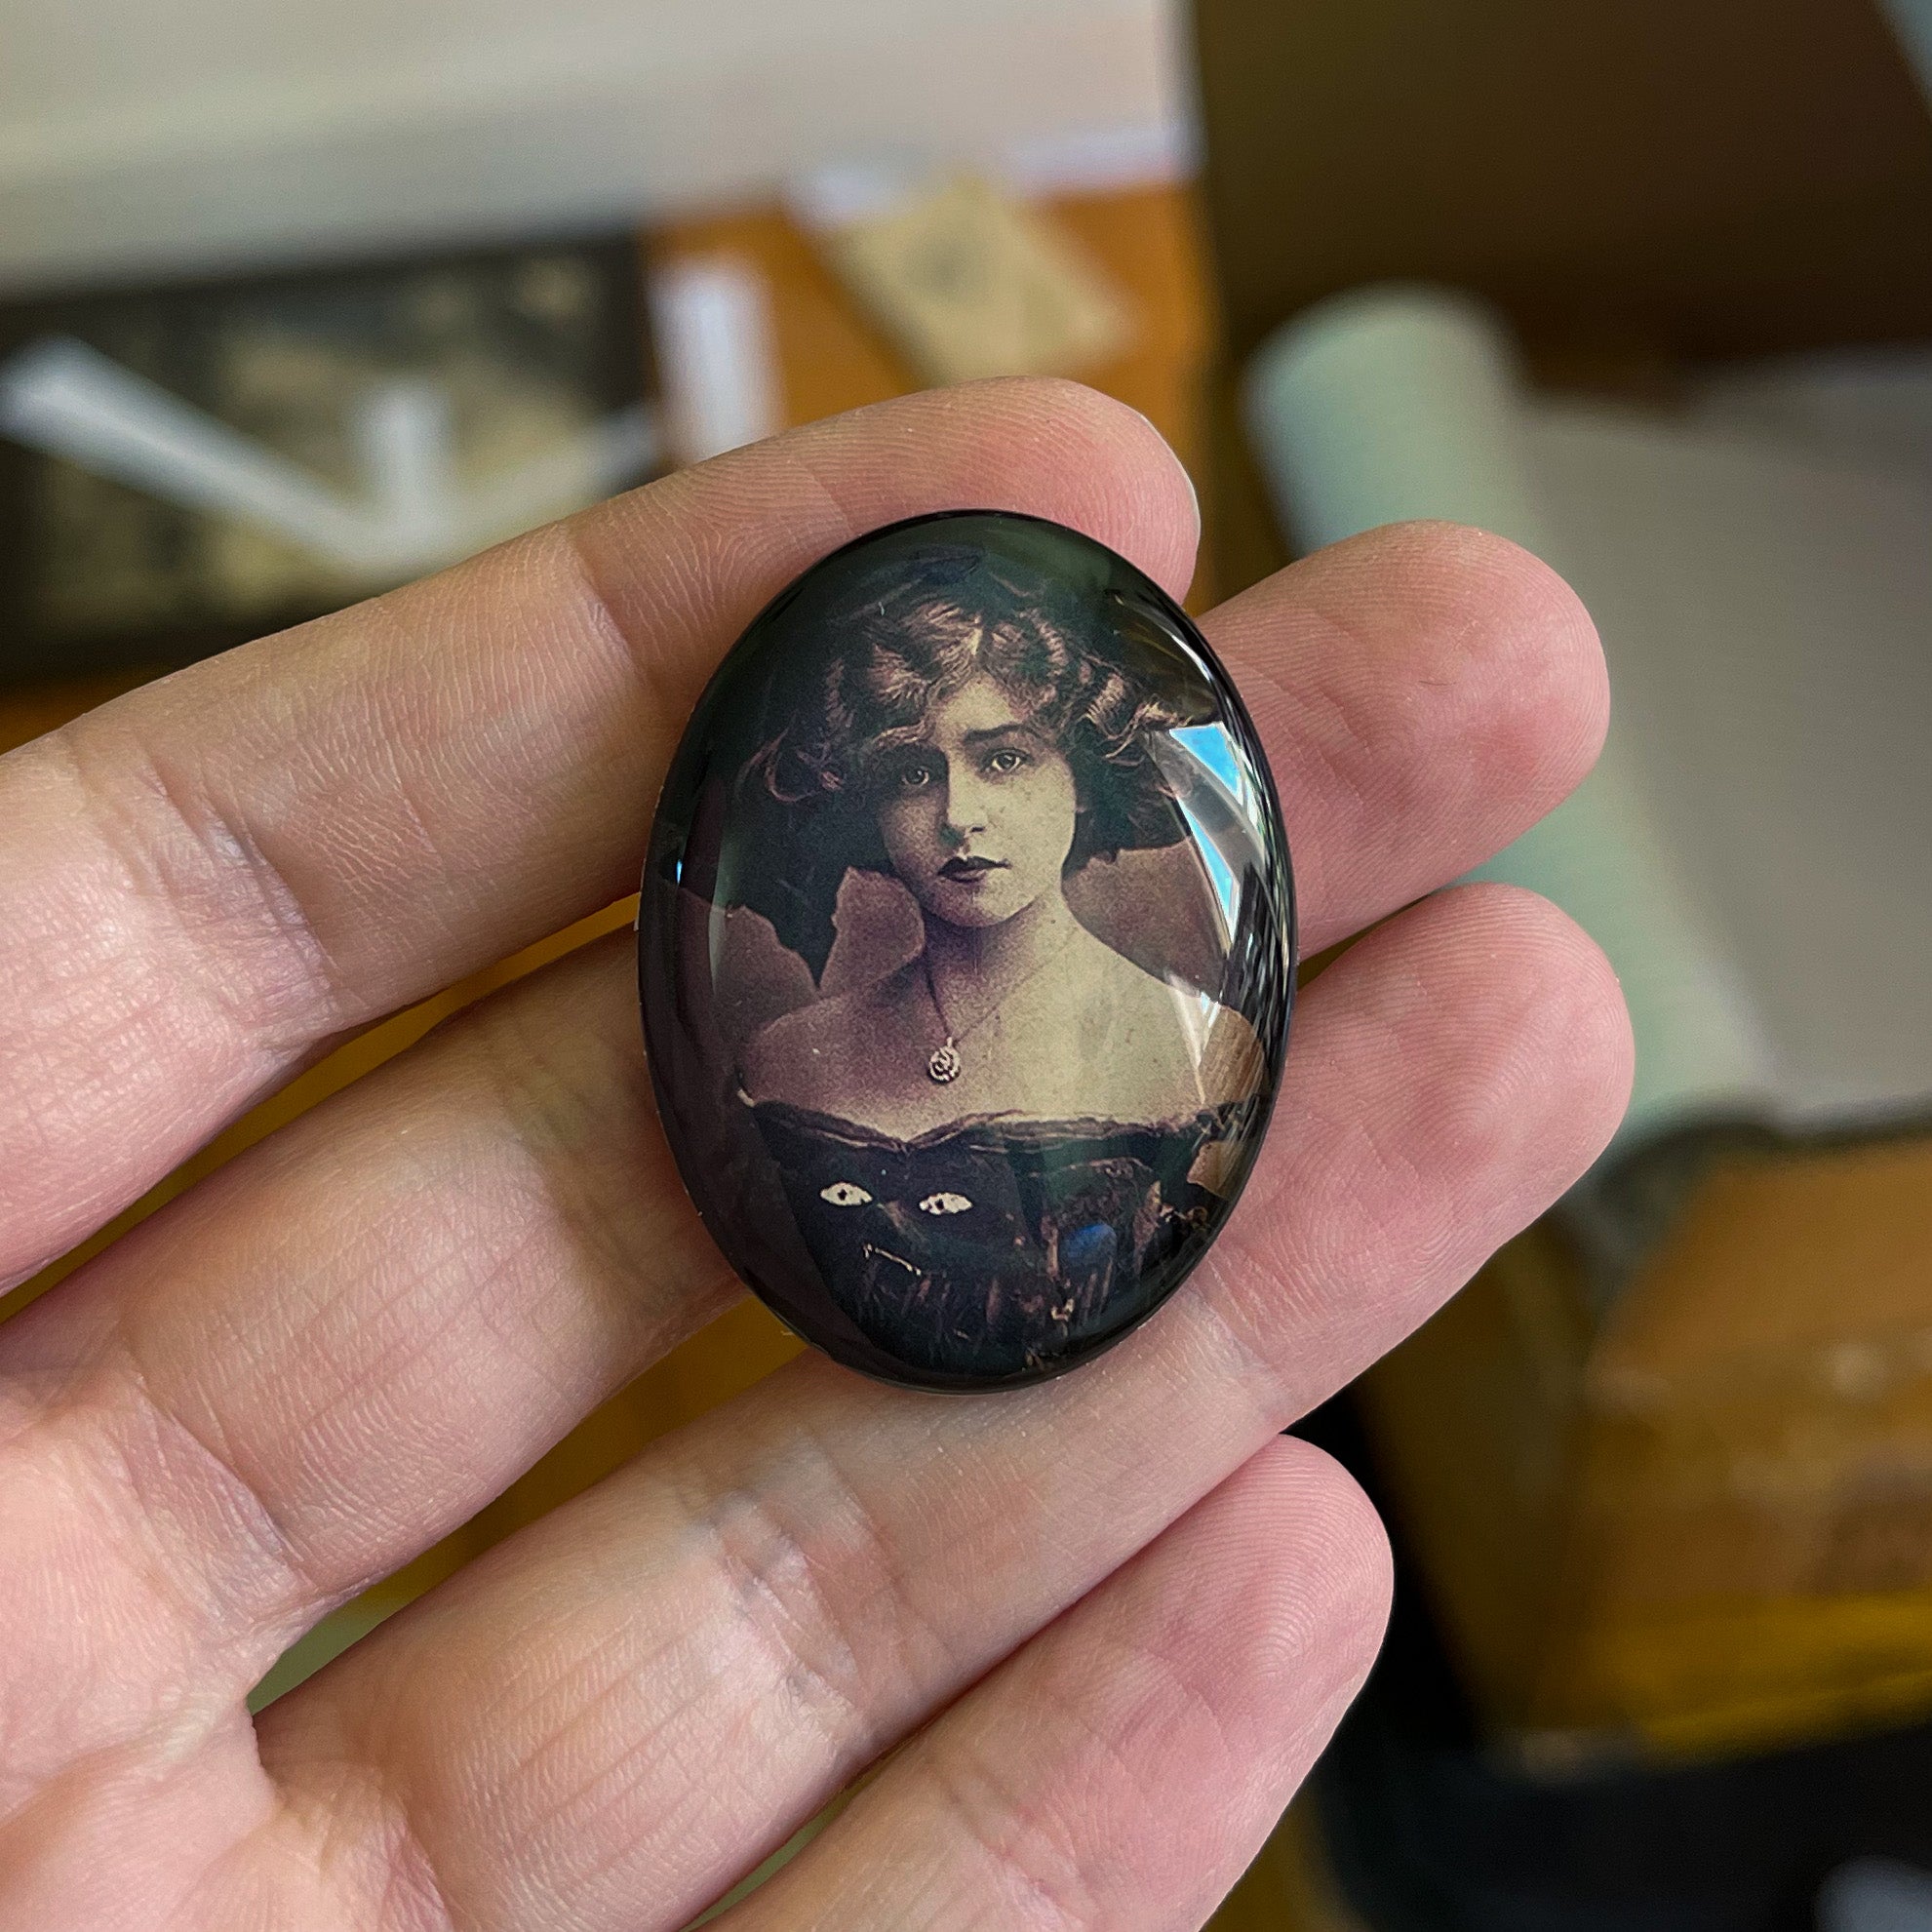 Mysterious Victorian Woman Photo Glass Cameo Cabochon